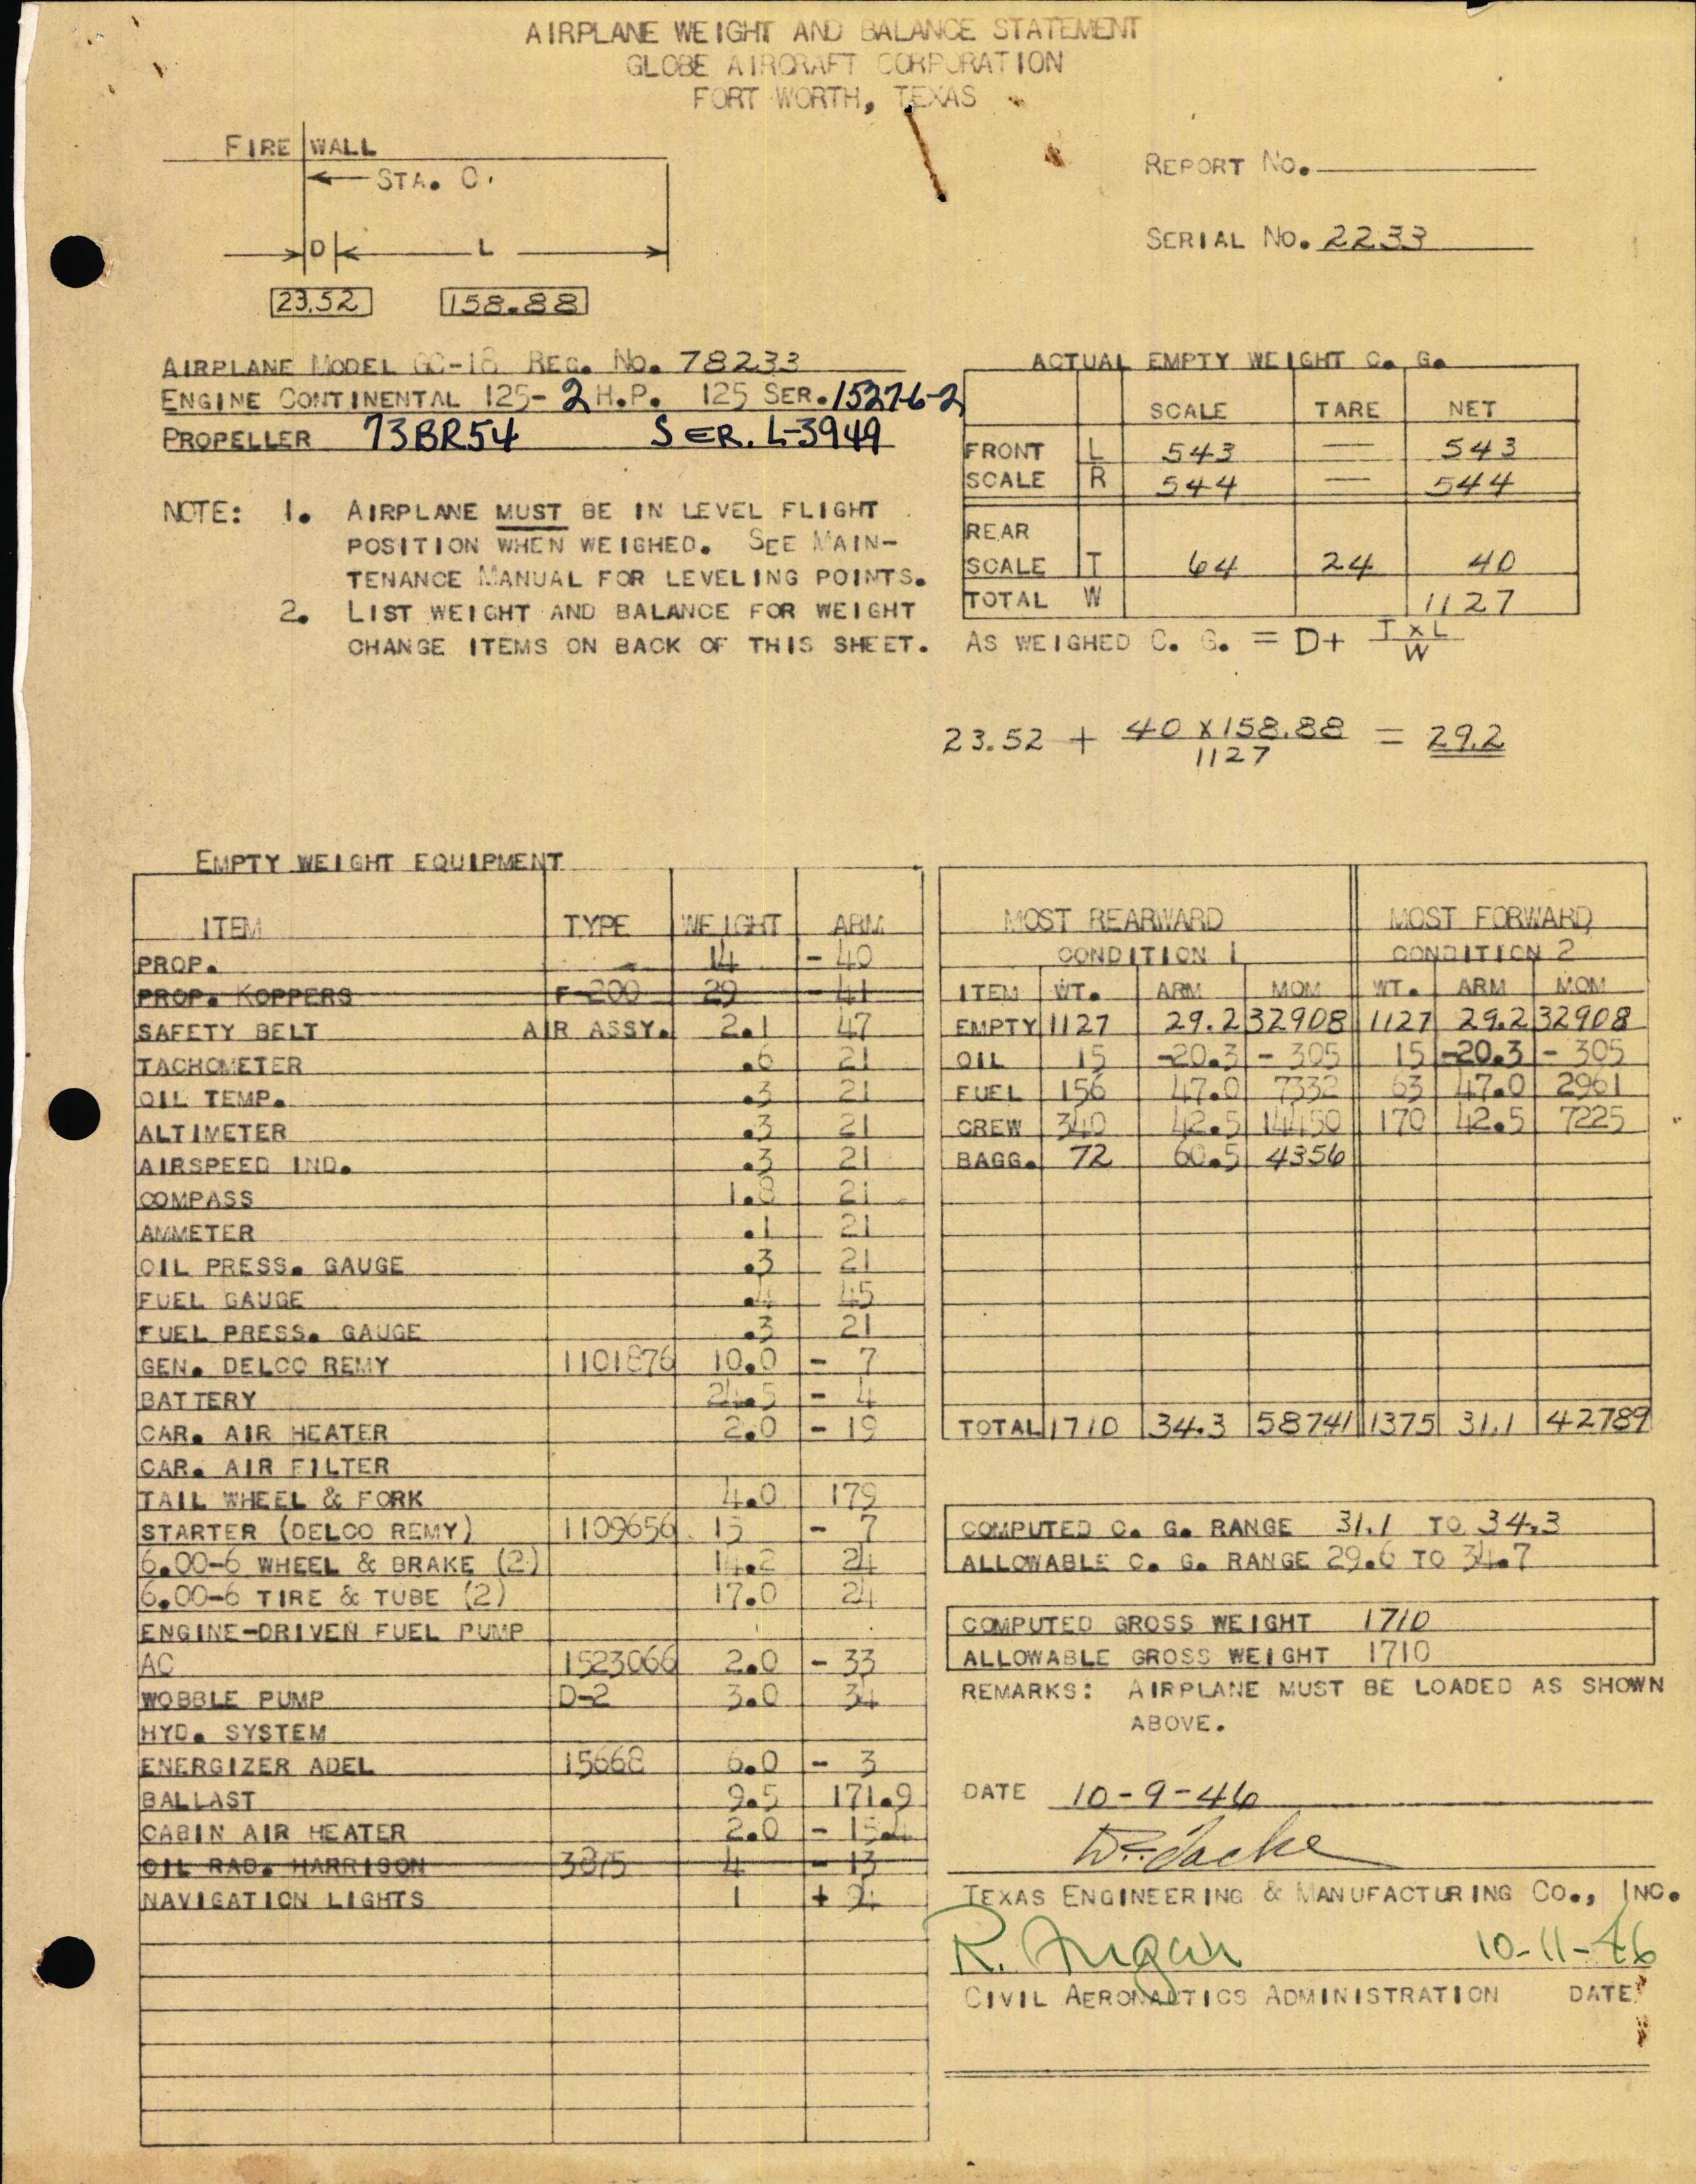 Sample page 1 from AirCorps Library document: Technical Information for Serial Number 2233